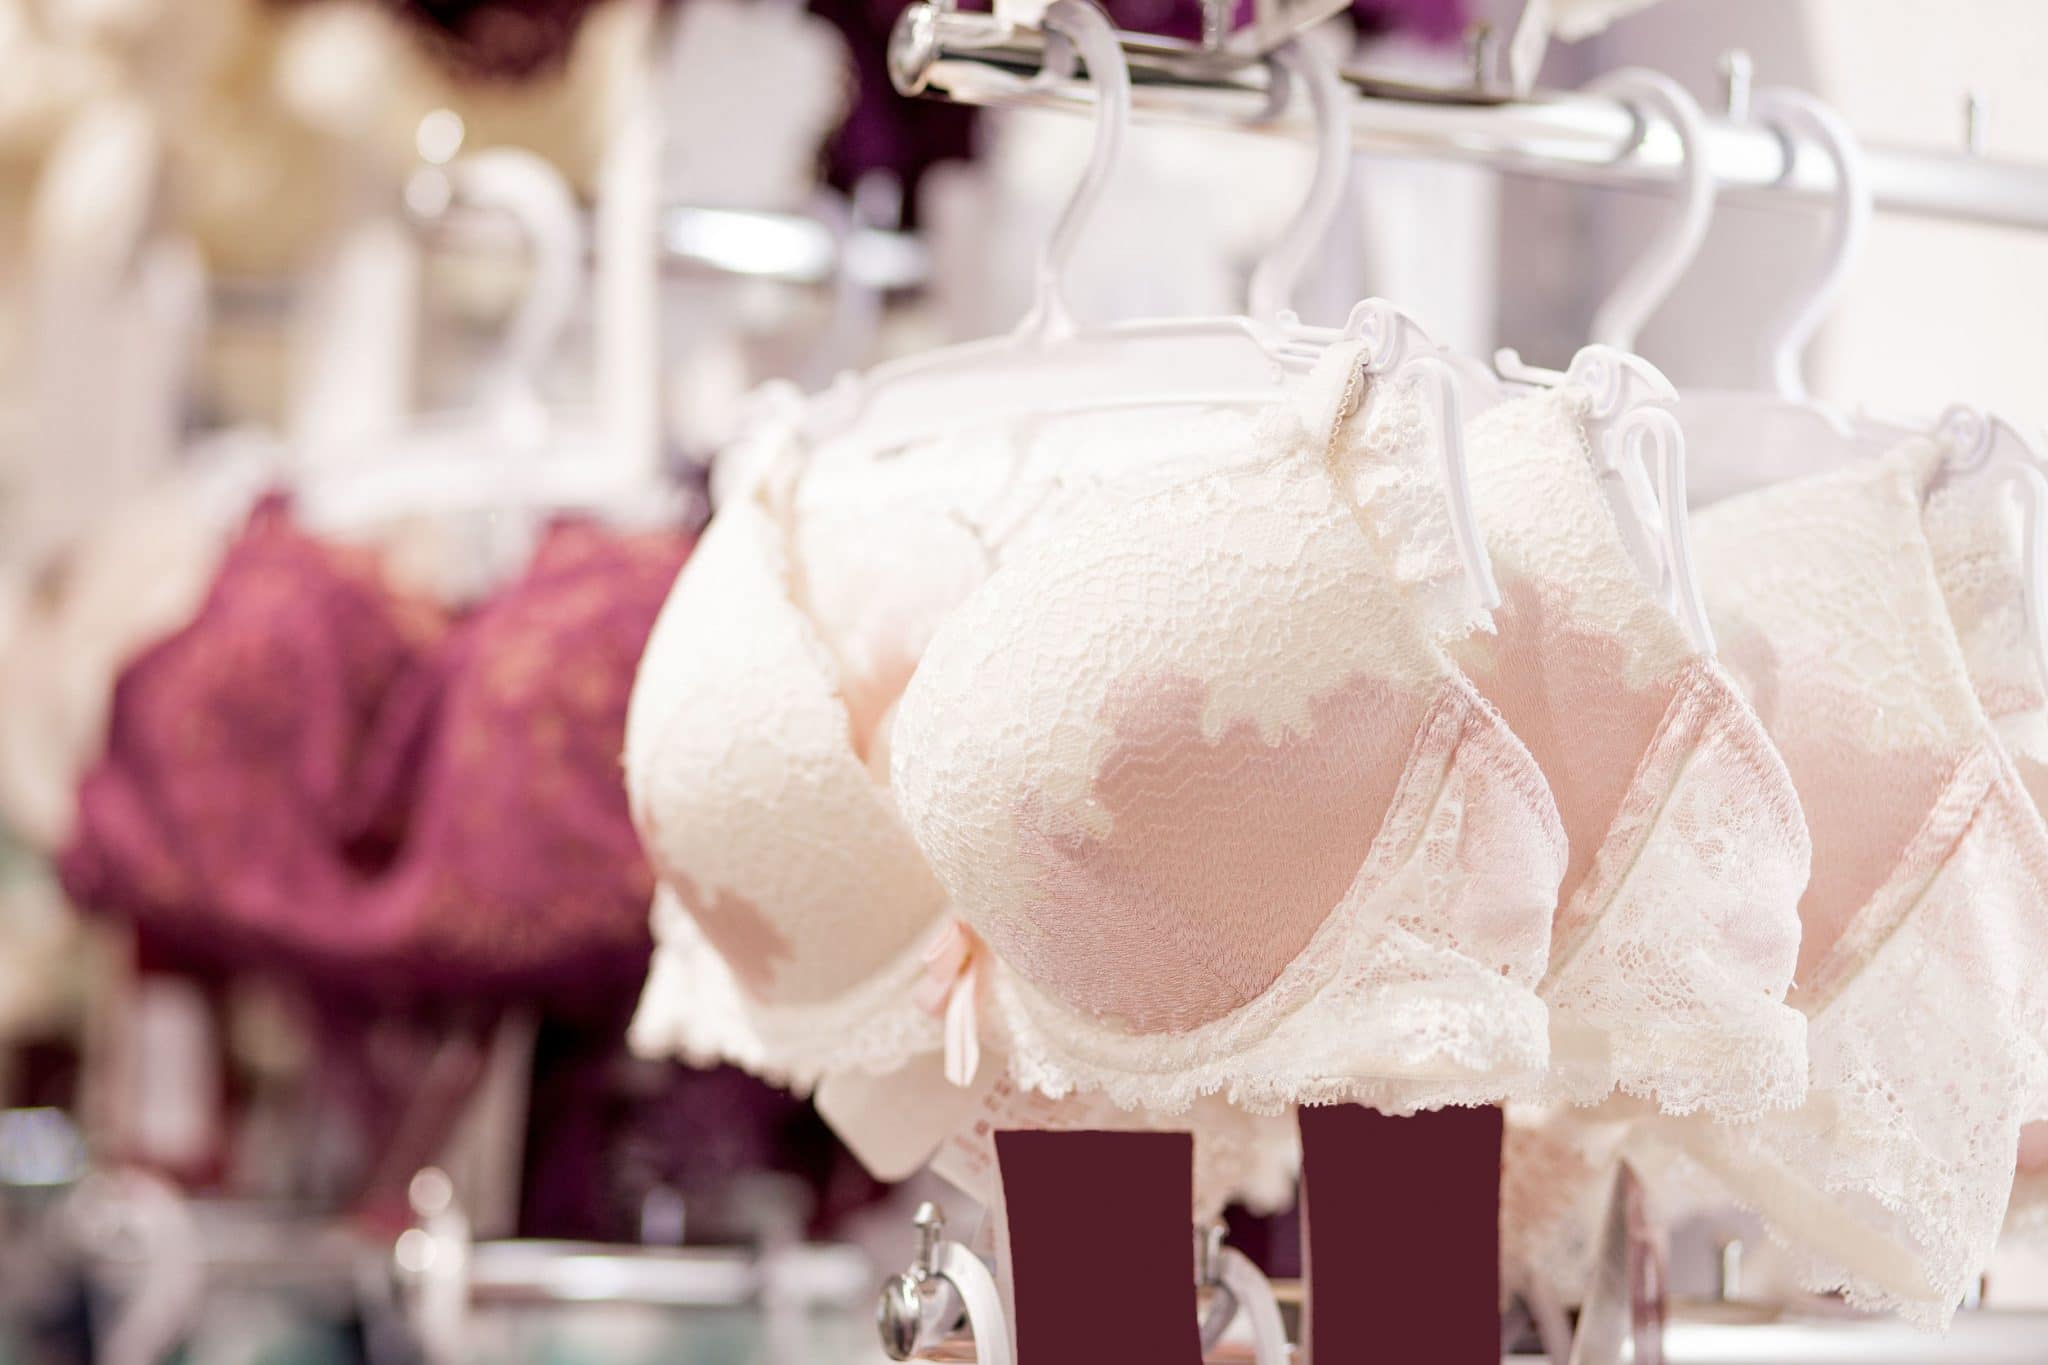 D Cup Bras & Underwear, Lingerie Outlet Store, Free UK Delivery